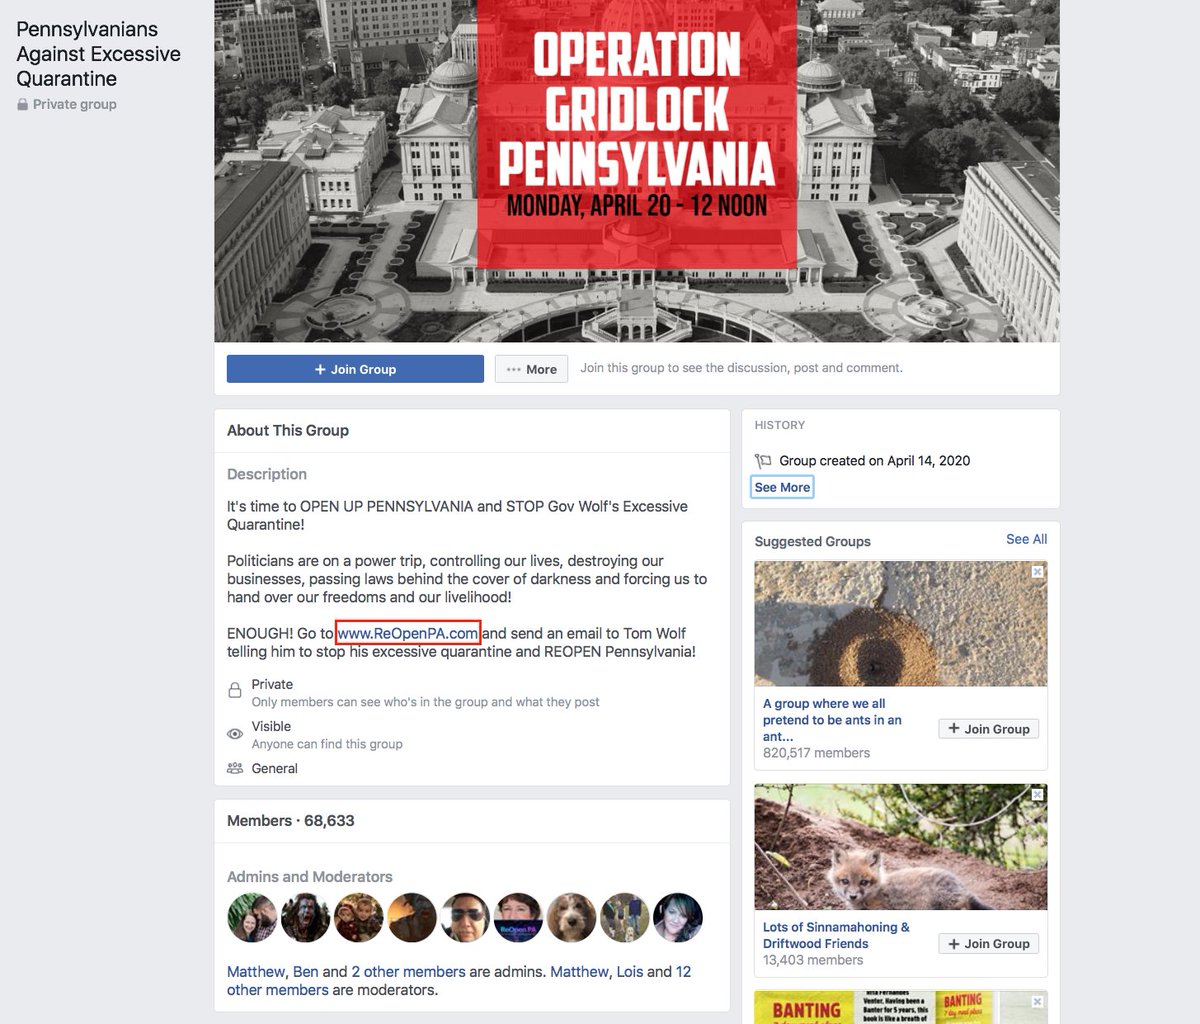 'Pennsylvanian Against Excessive Quarantine' Facebook Group created by Christopher Dorr, April 14, 2020 Redirect from www[.]REOpen[.]PA[.]com to Dorr Brothers 'Pennsylvania Firearms Association' https://action[.]pennsylvaniafirearmsassociation[.]org/action/end-wolfs-shutdown/